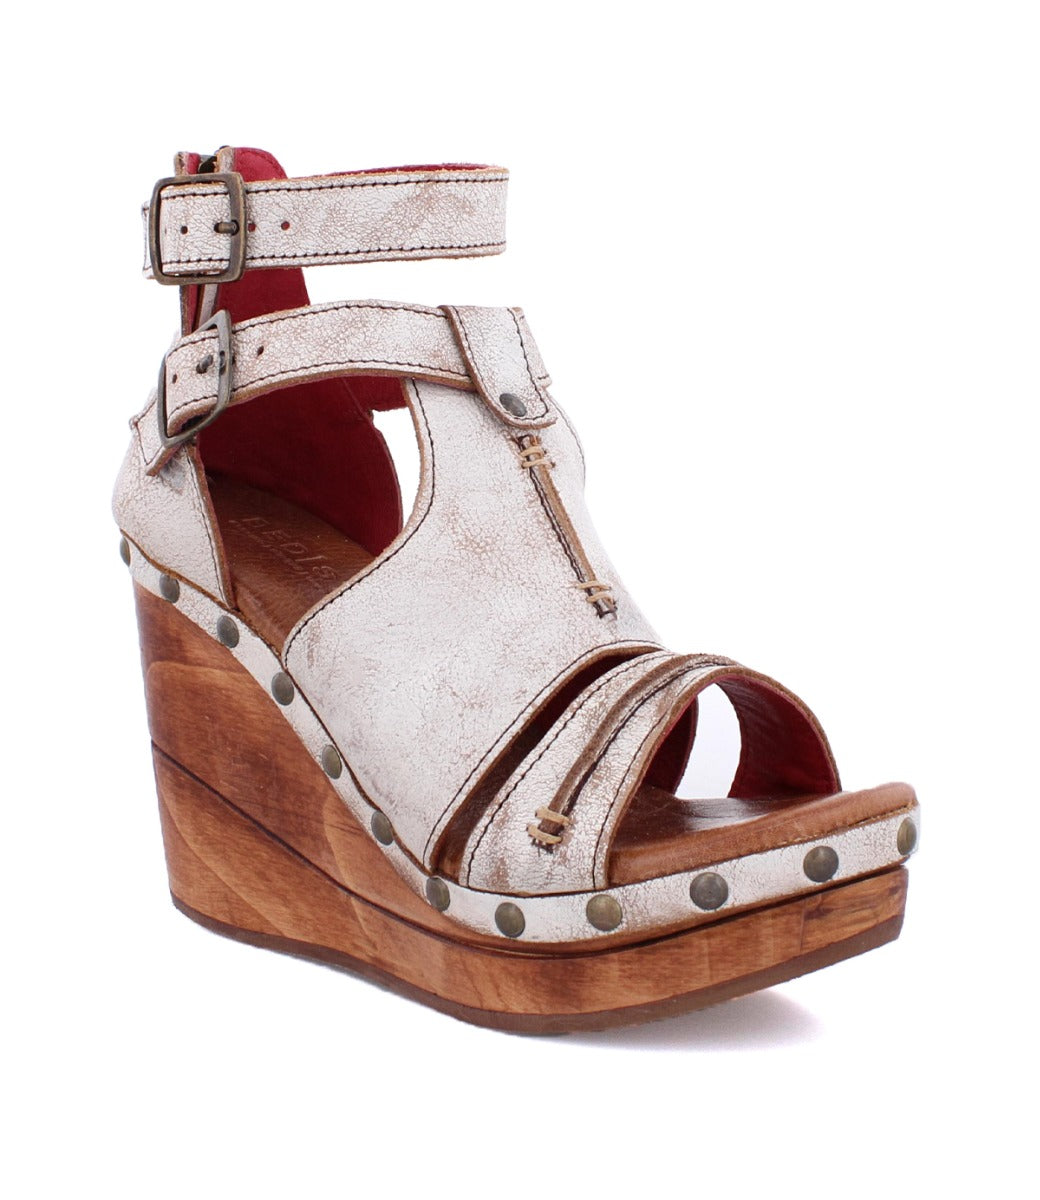 A women's white wedge sandal with a wooden platform, called Princess by Bed Stu.